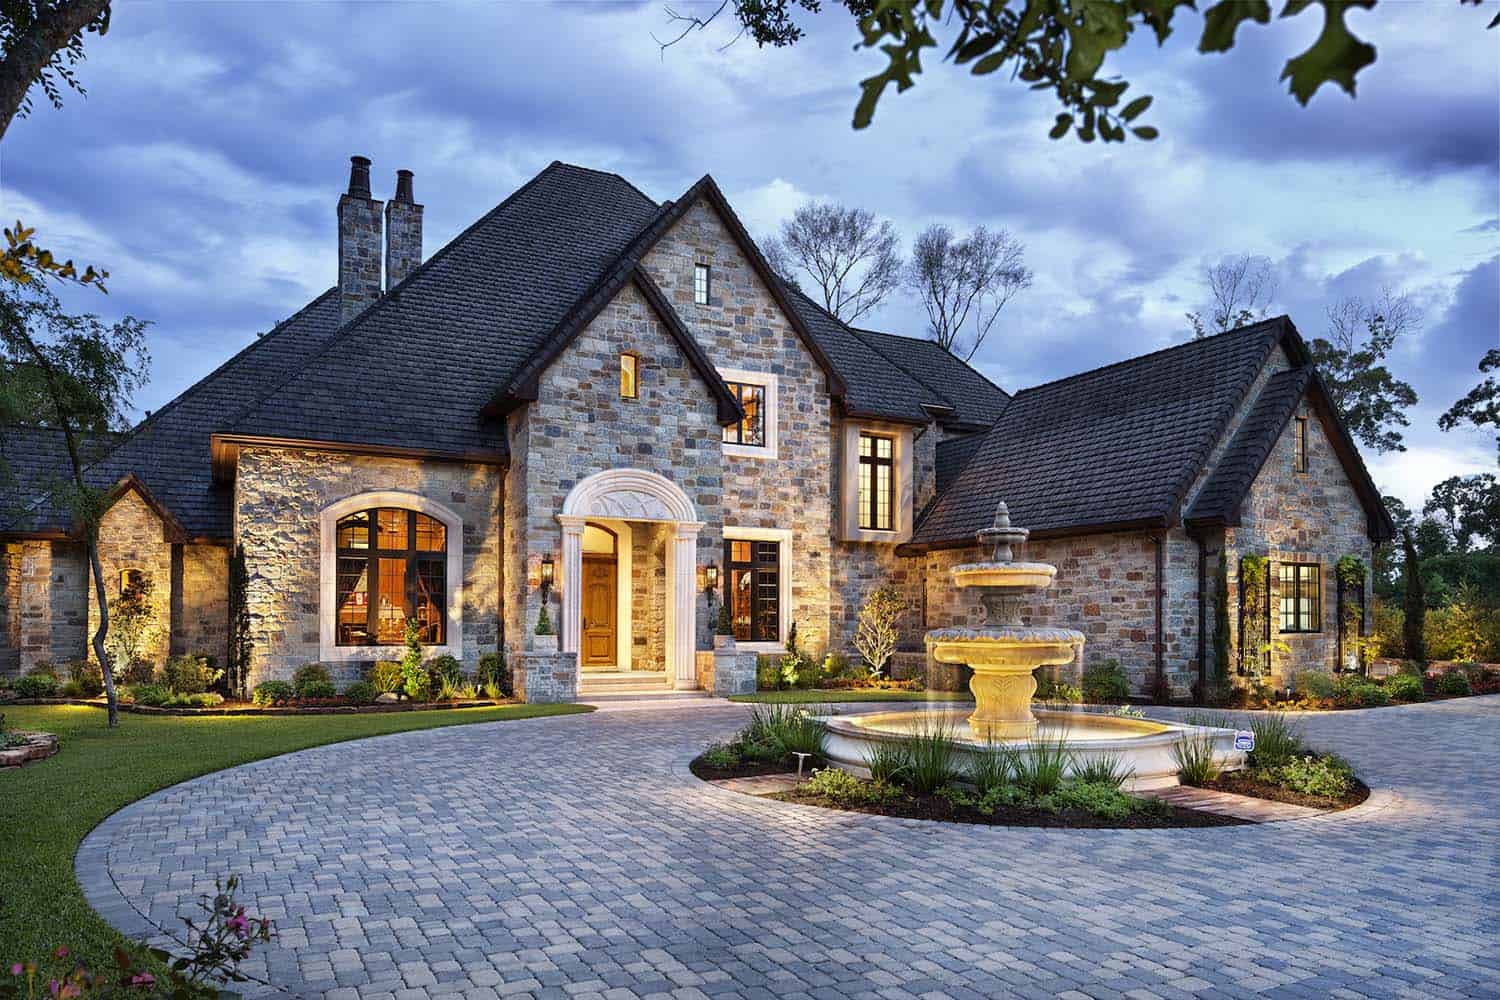 Dream House Tour: English manor house with opulent details in Texas